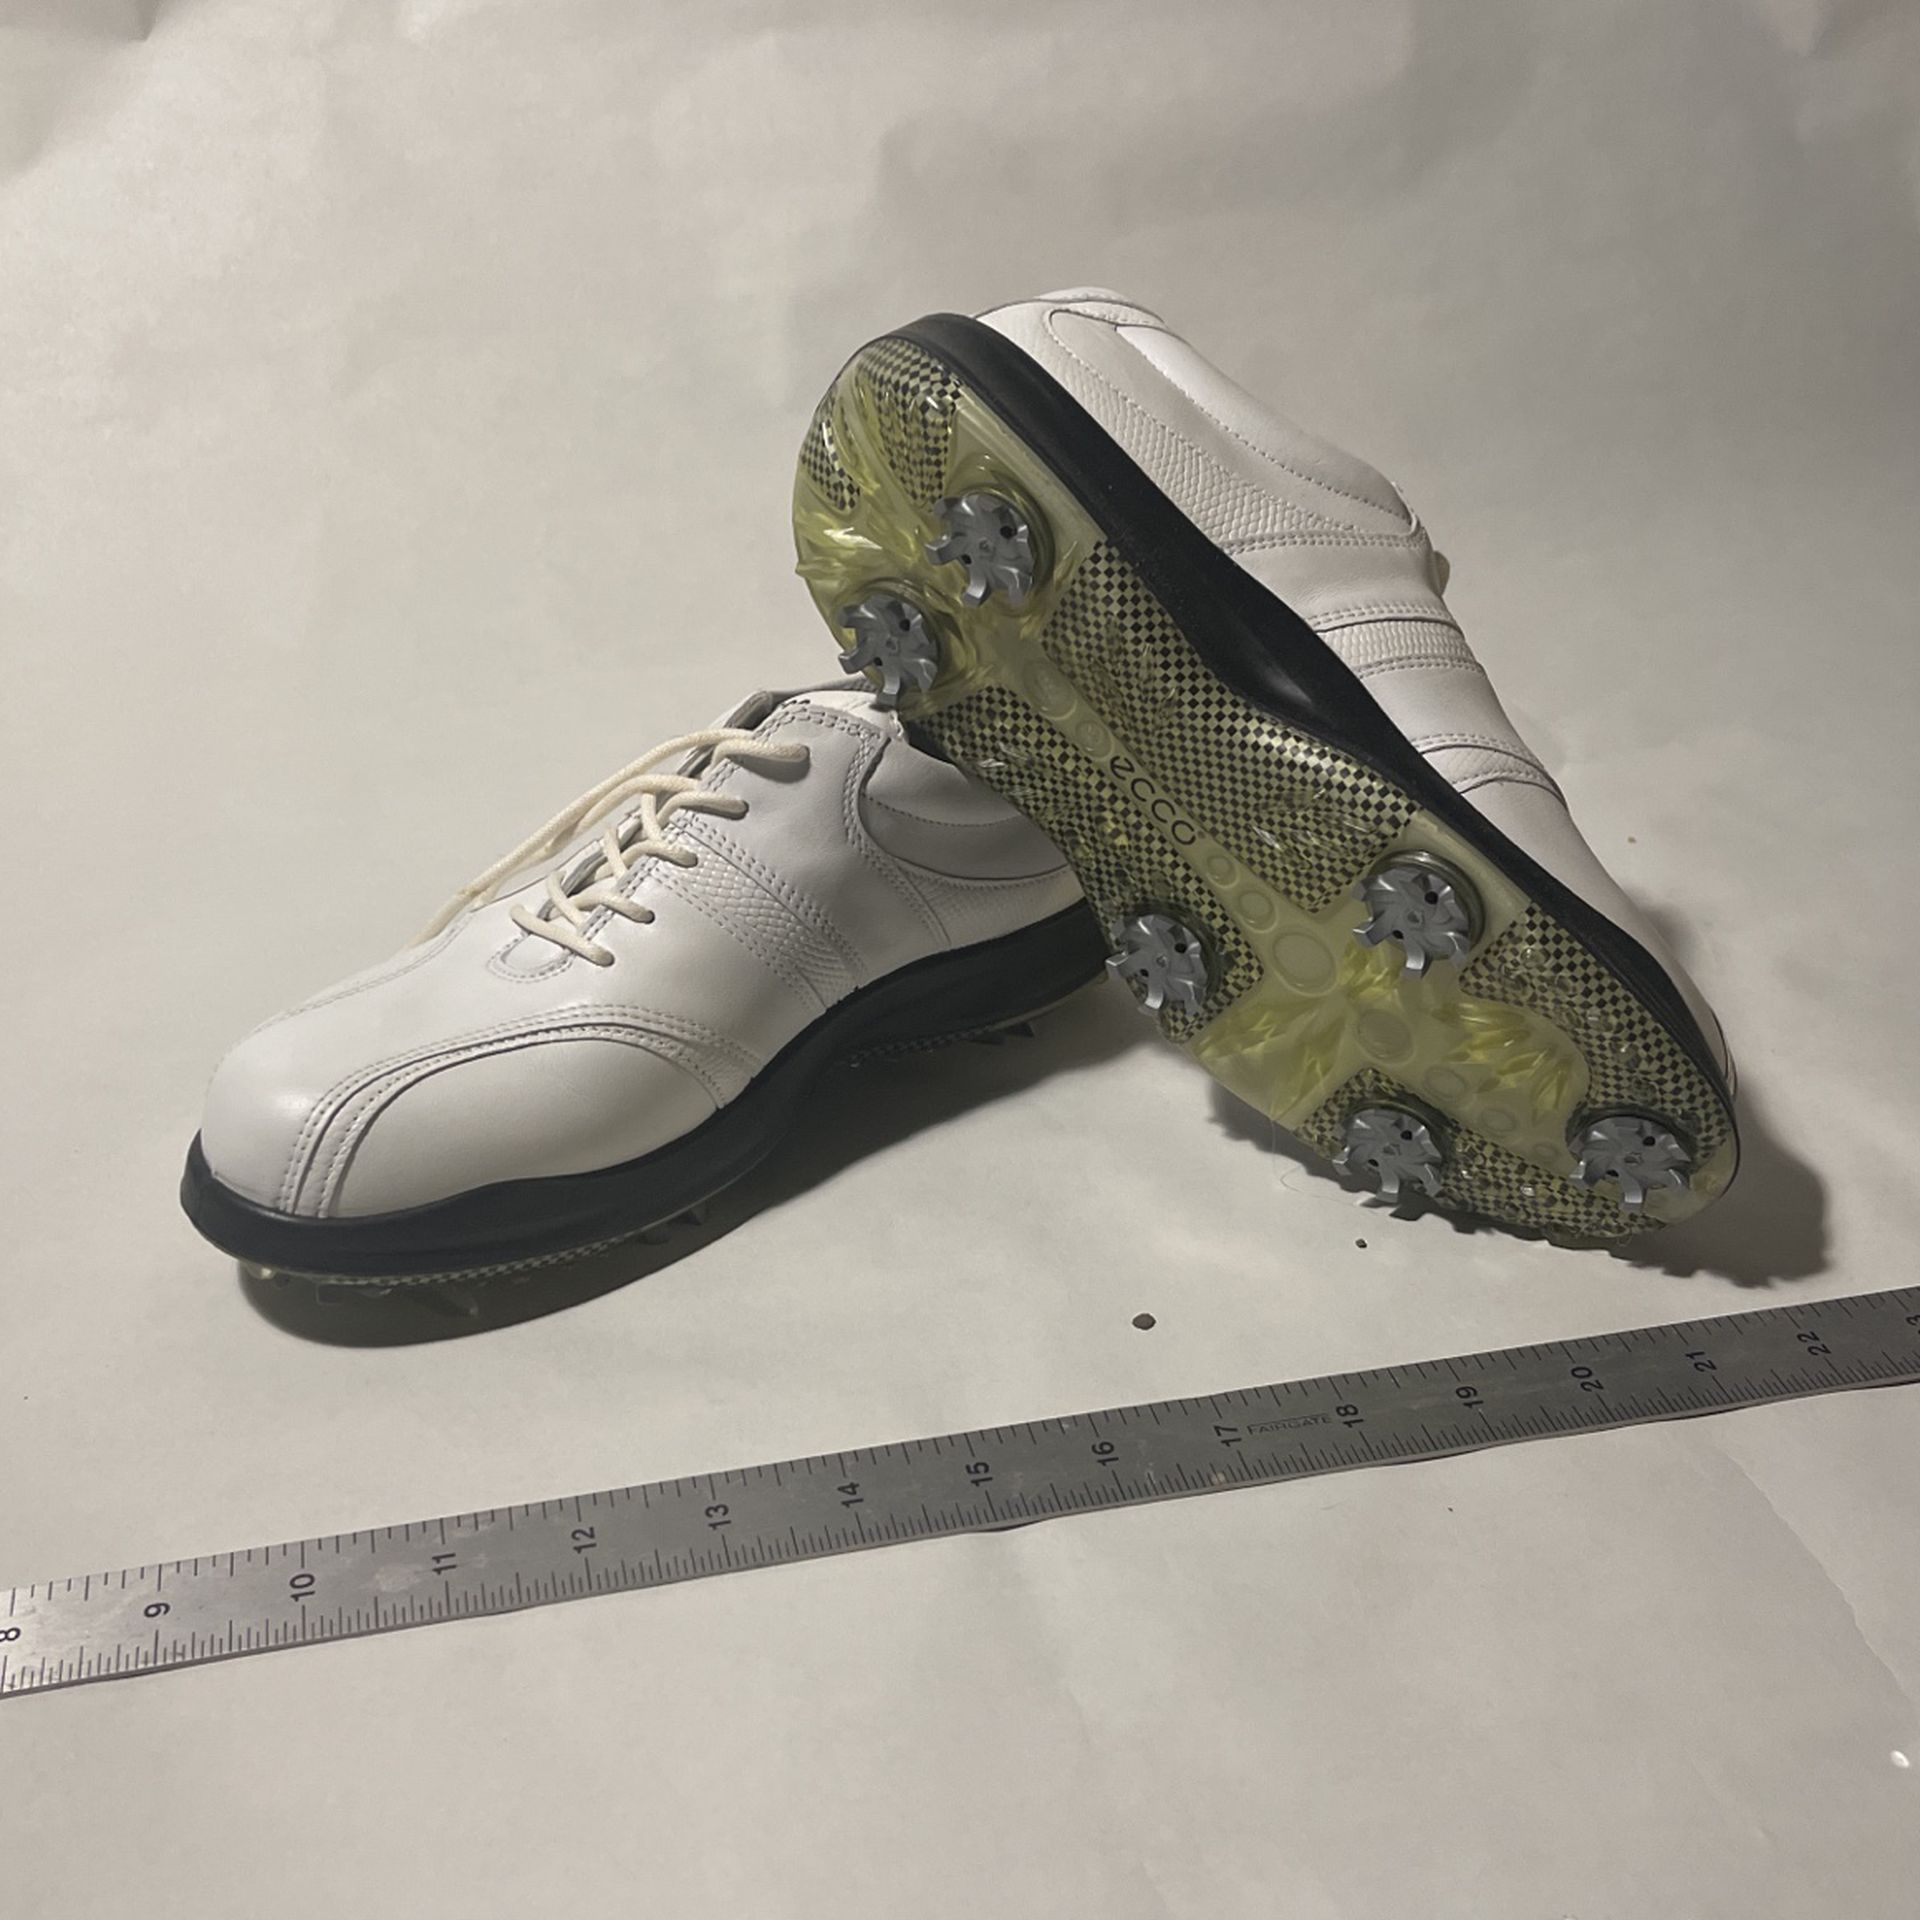 GOLF SHOE WOMENS ecco usa 6.5(37 european) for Sale in Adelaide, CA OfferUp